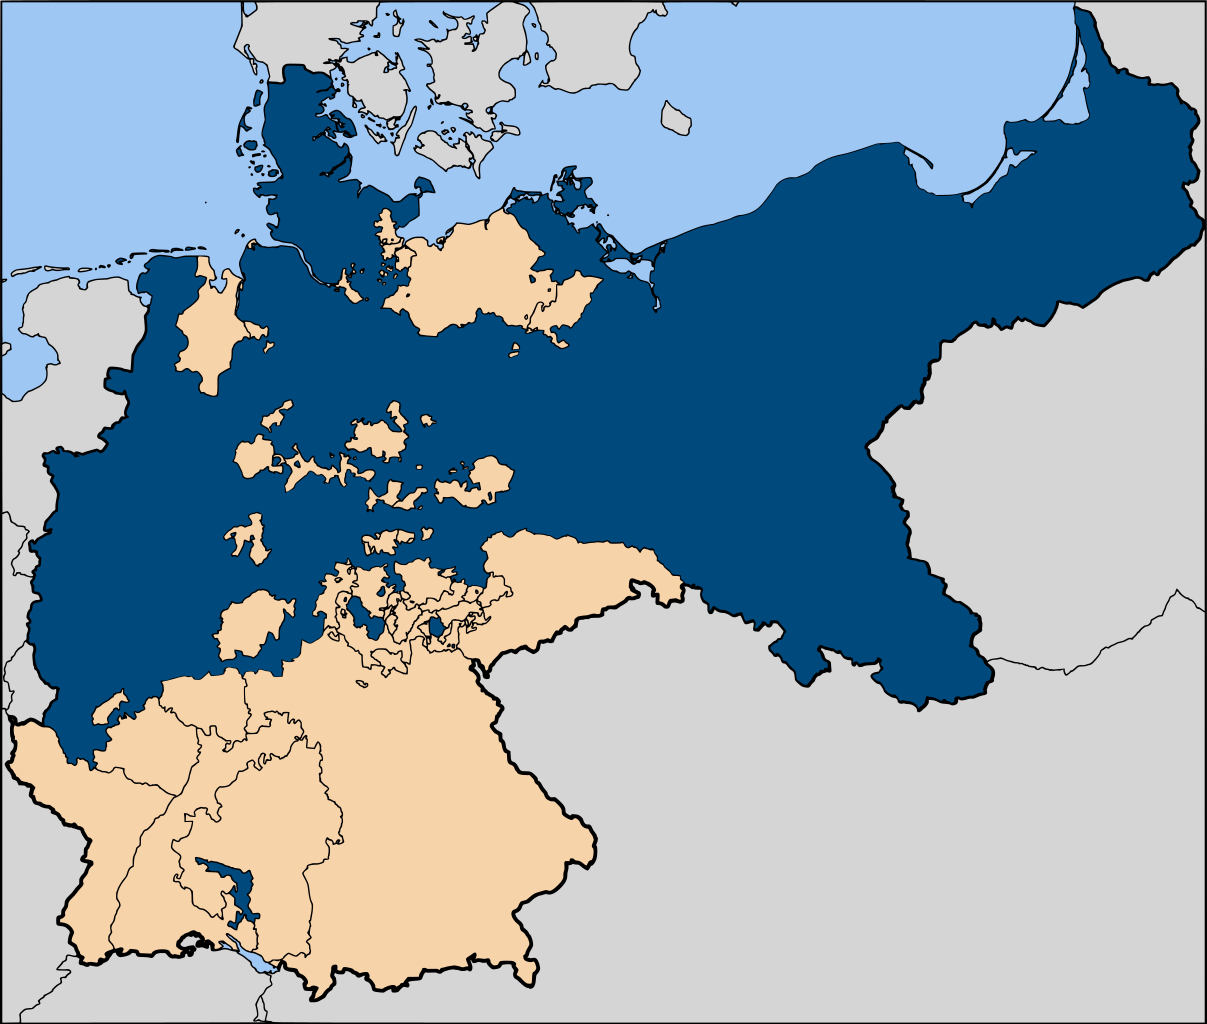 The Kingdom of Prussia within the German Empire.